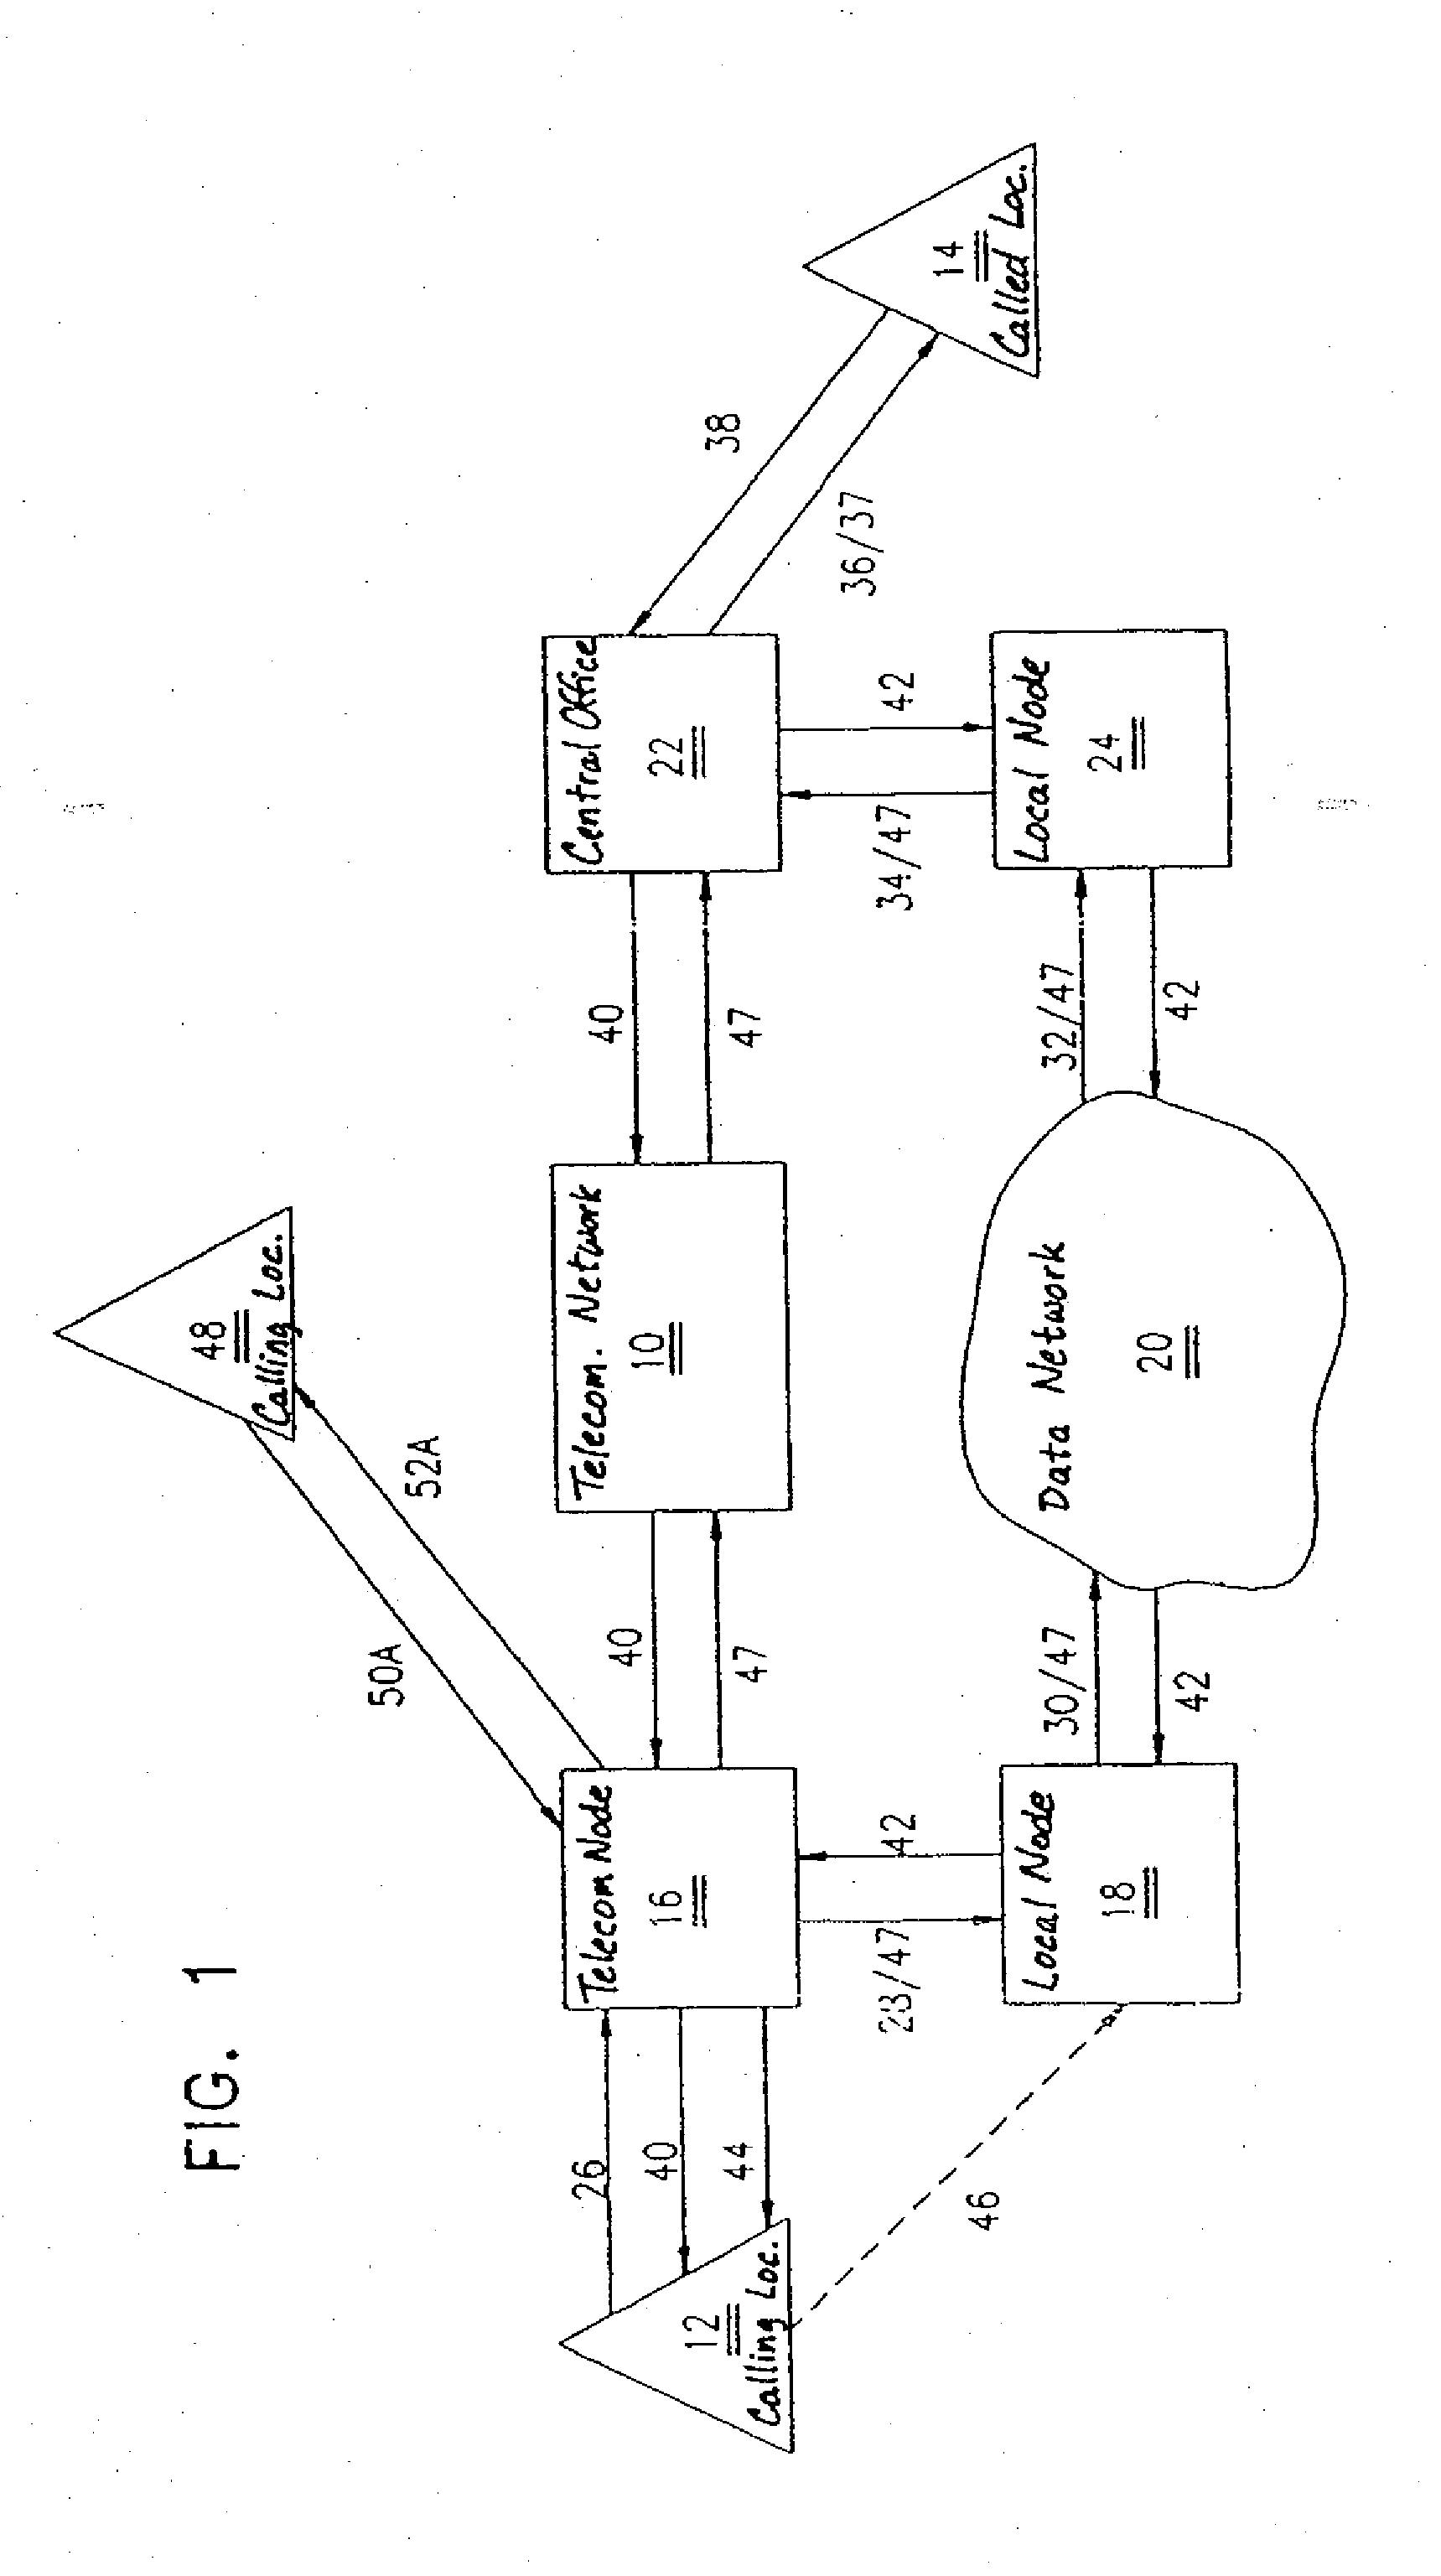 System and Method for Managing Multimedia Communications Across Convergent Networks